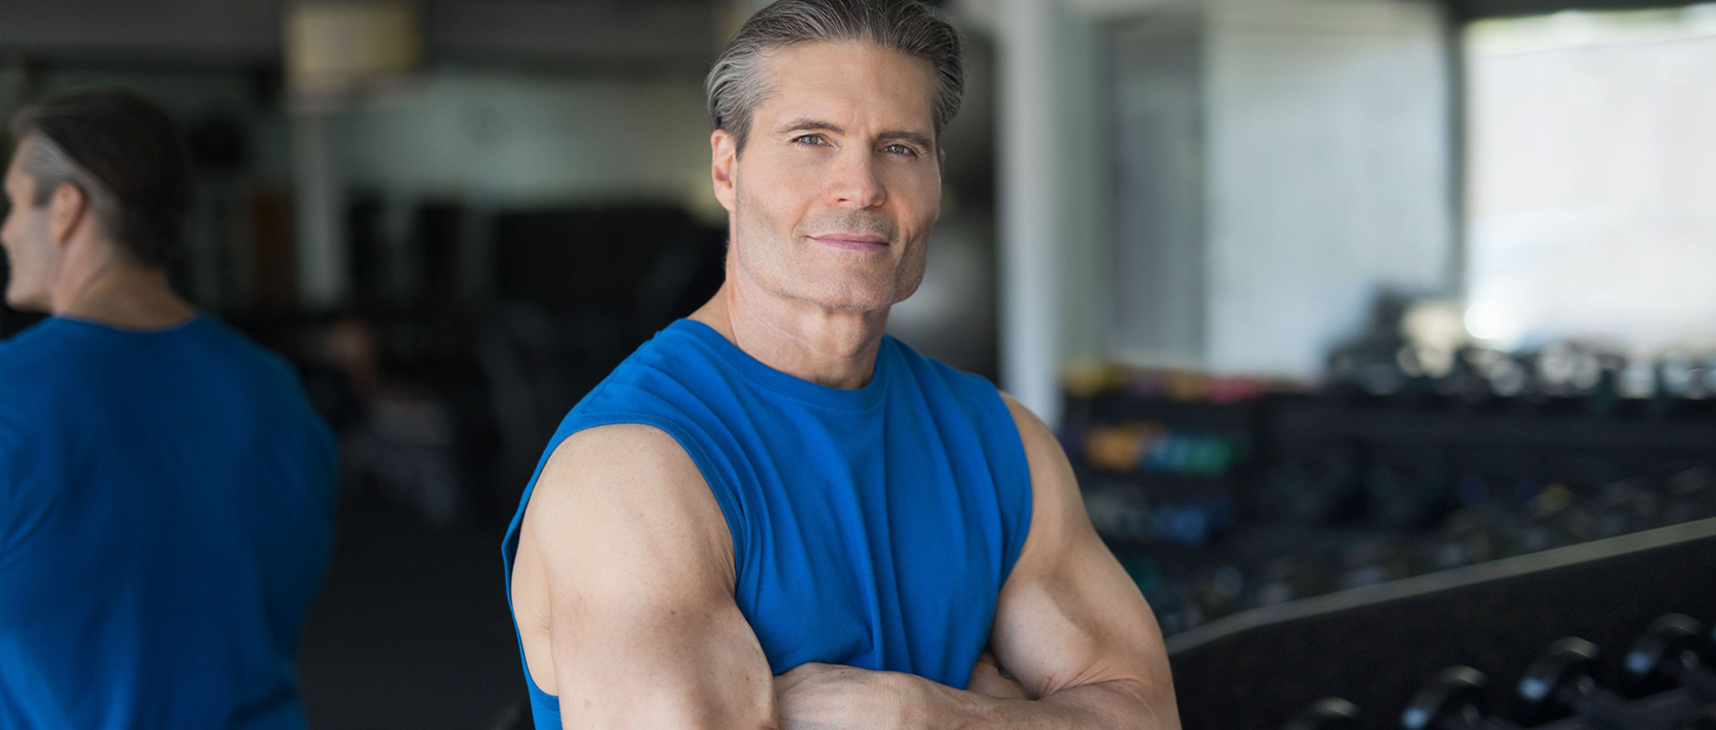 Fearless Fitness Personal Trainer San Diego / North County